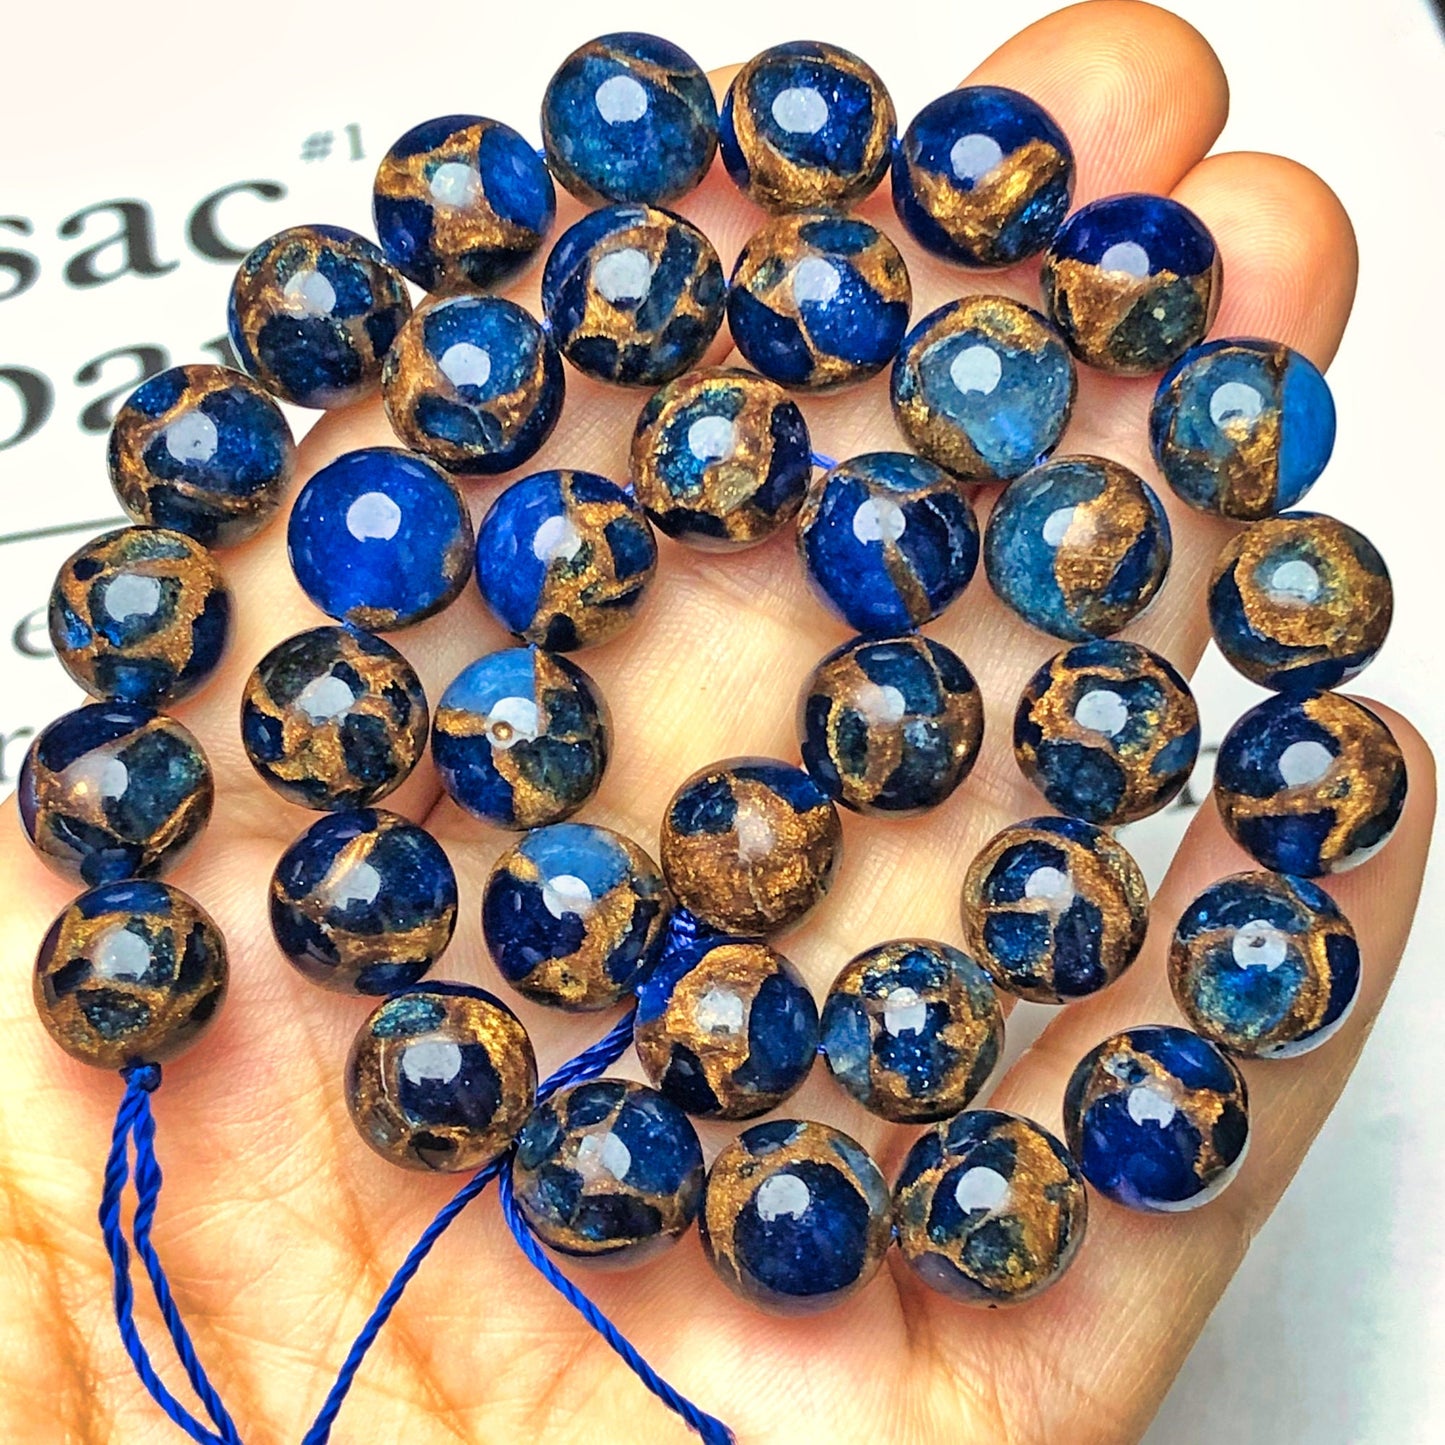 Dark Blue Cloisonne Gold Sand Natural Stone Spacer Rondelle Beads for DIY Jewelry Making - 7.5 Inches